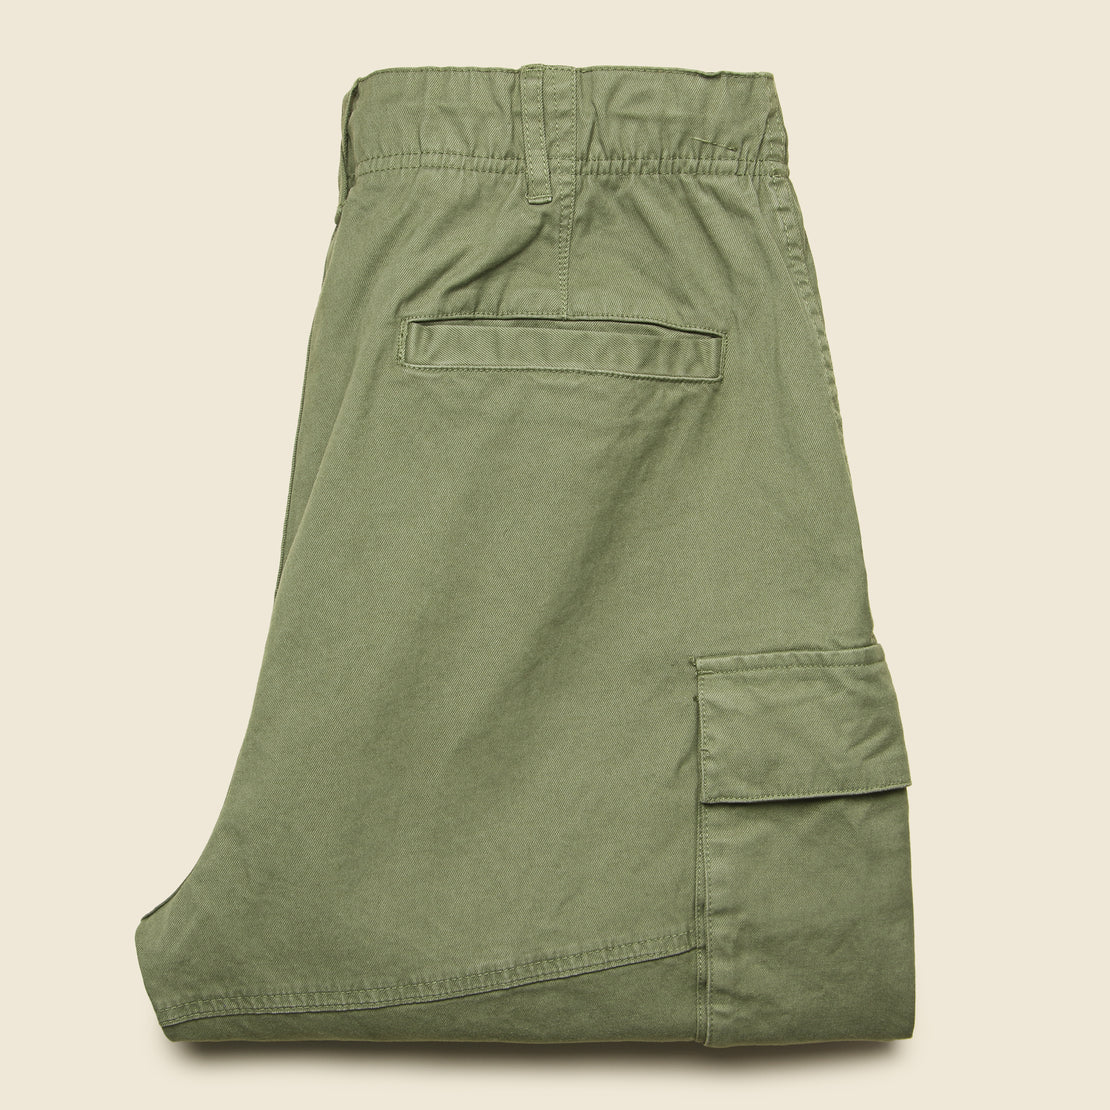 City Cargo Pant - Olive - Alex Mill - STAG Provisions - Pants - Twill